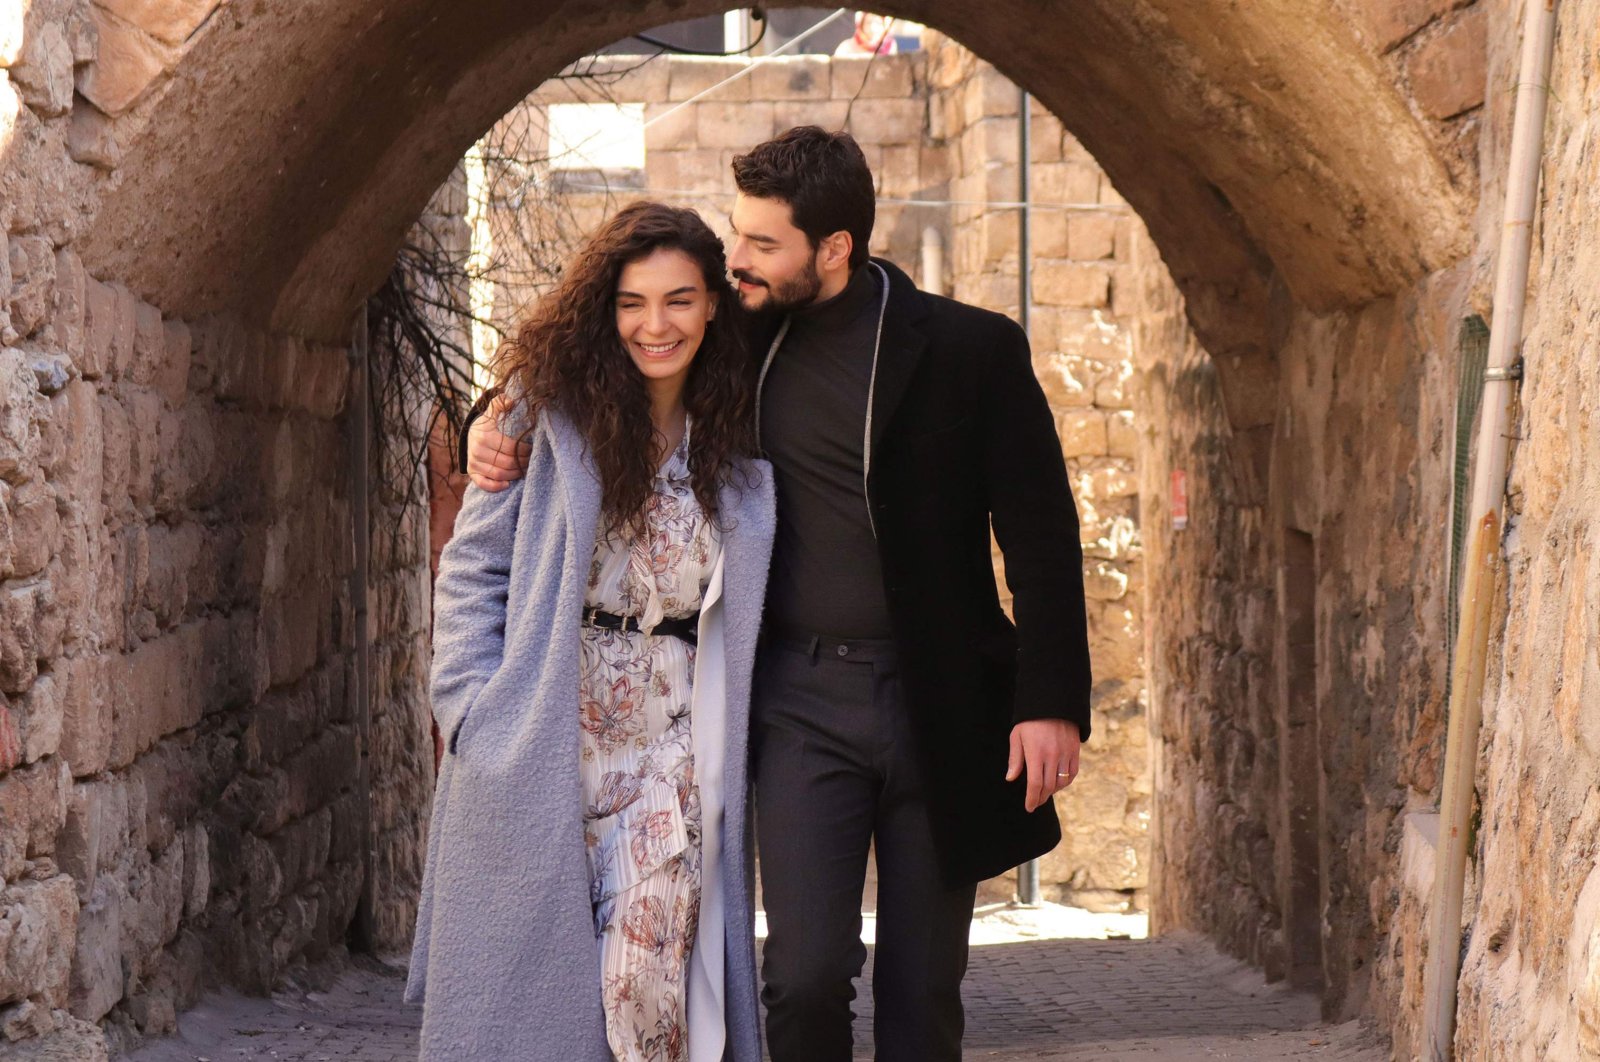 This still shot shows Ebru Şahin (L) and Akın Akınözü in "Hercai," originally aired by Turkish broadcaster atv and proved popular in South Asia with its scenes from southeastern Turkey's Mardin.